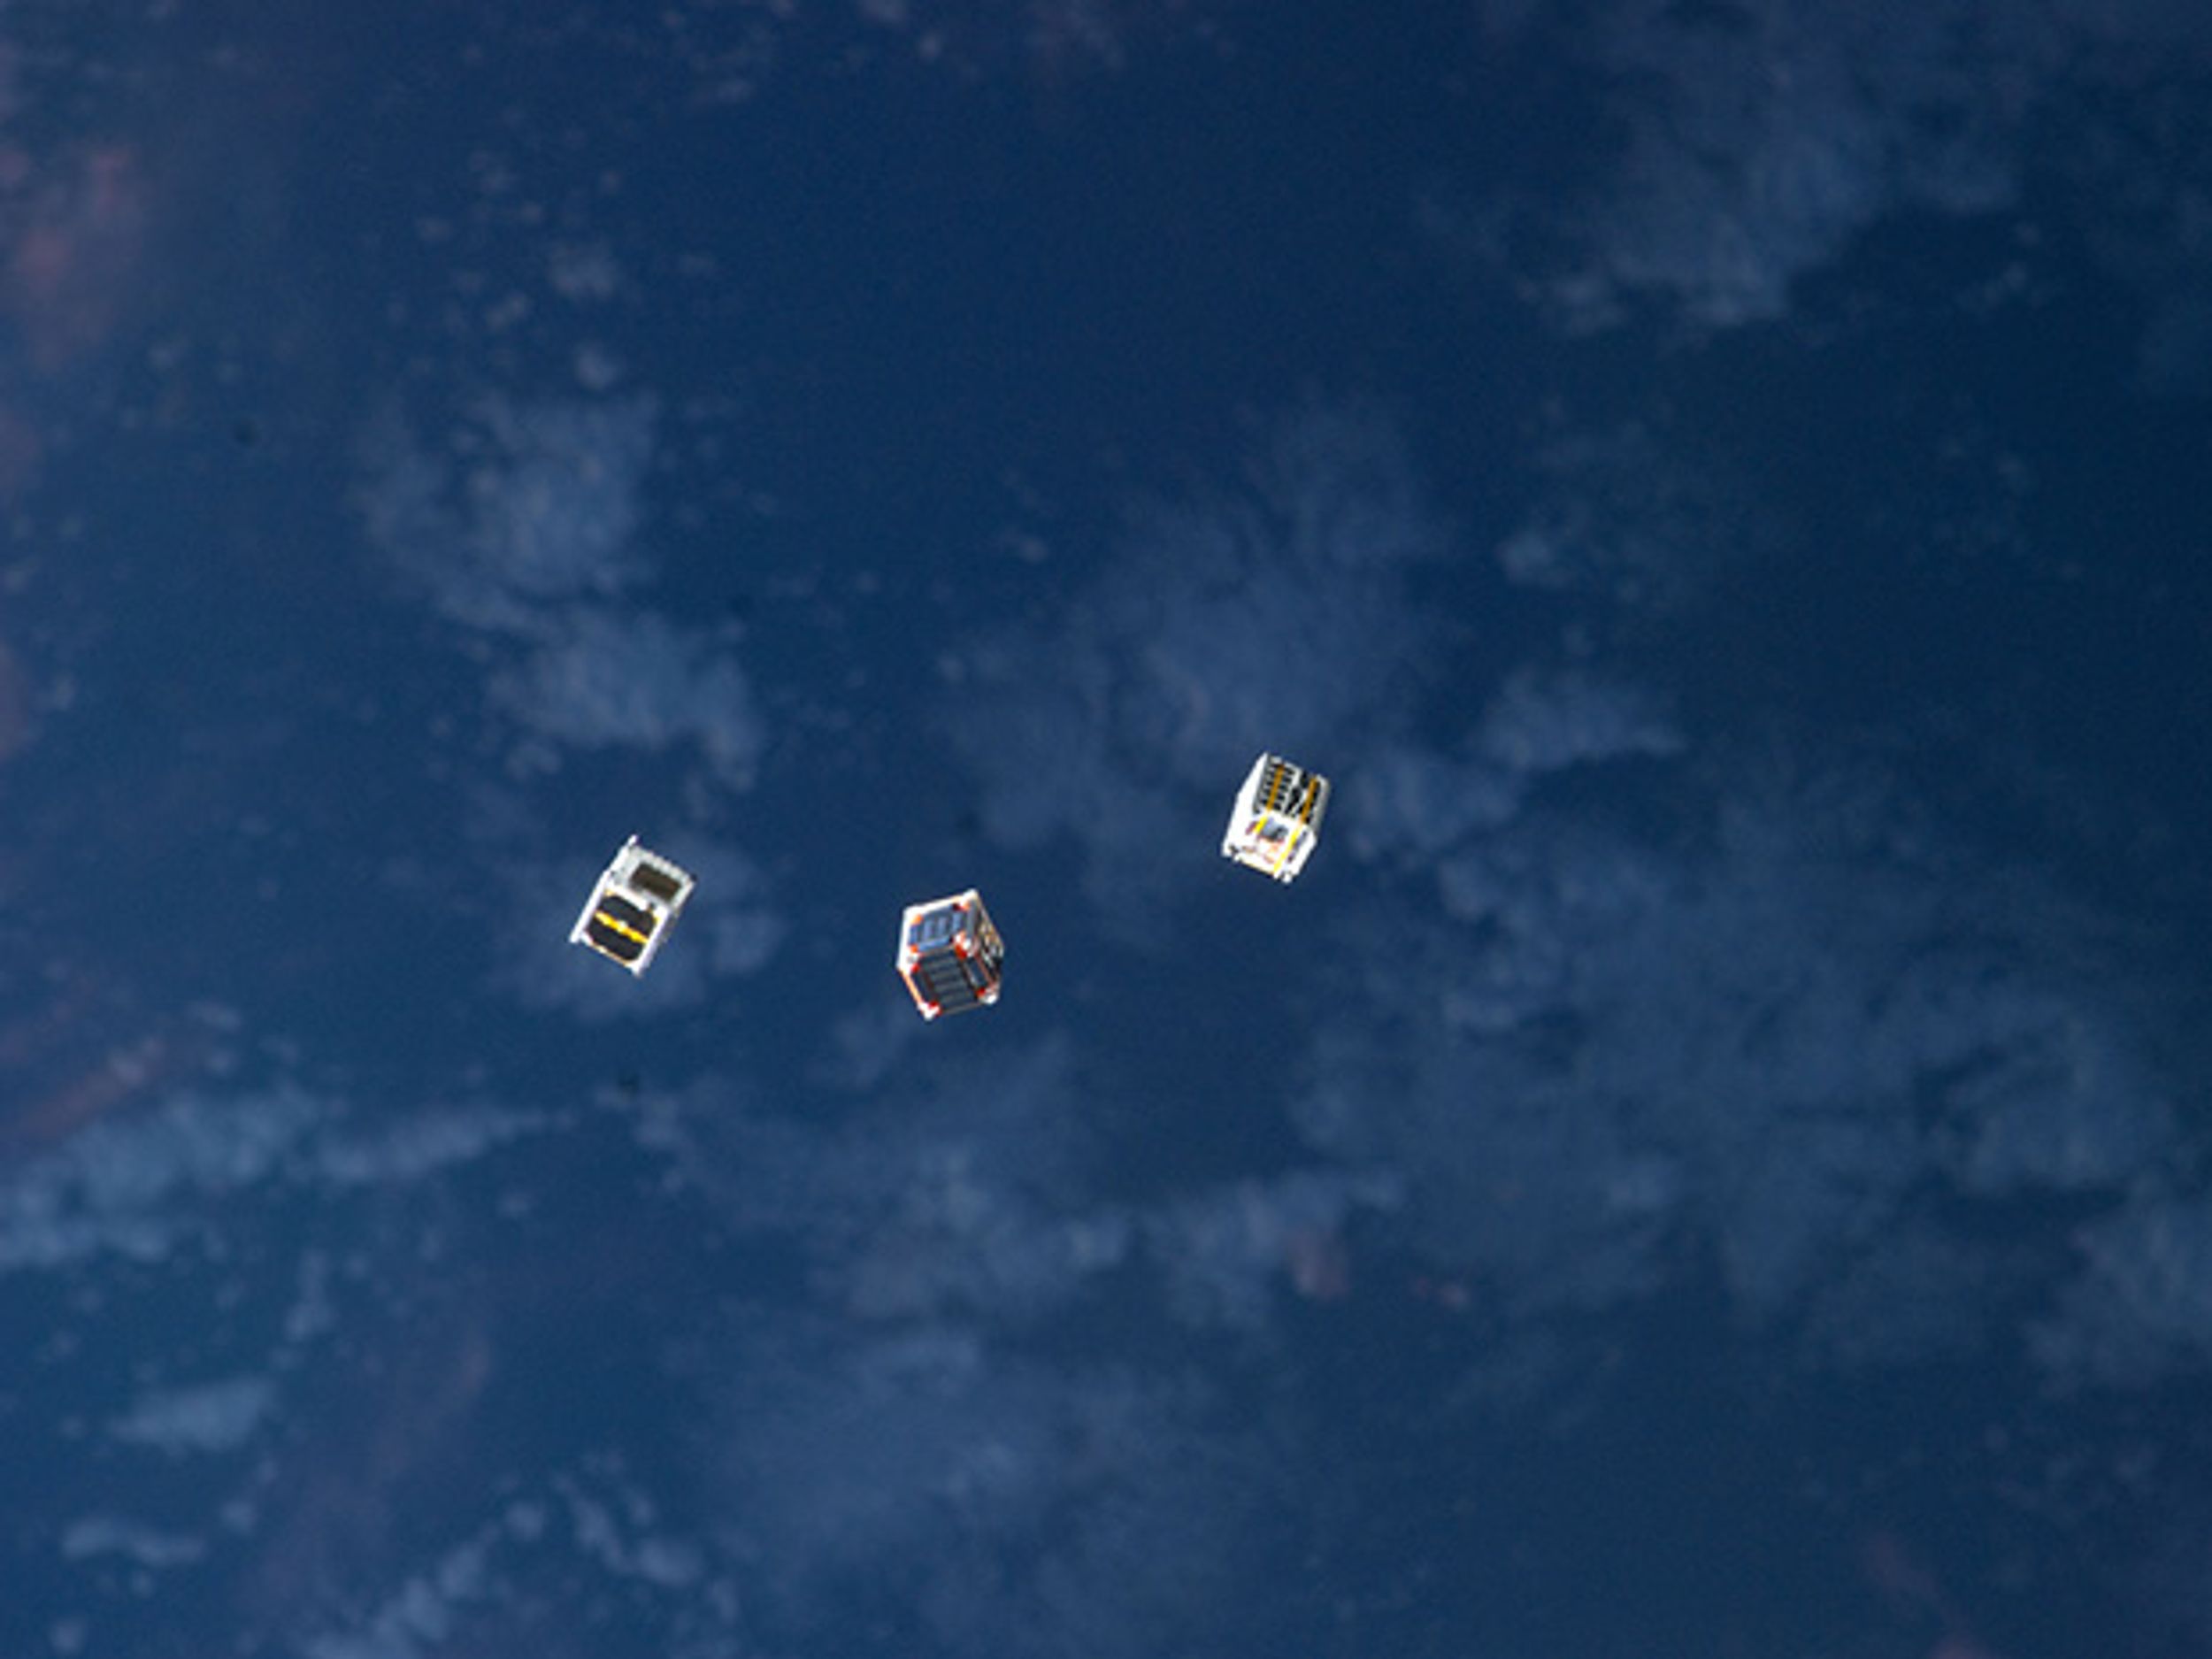 Image of small cube satellites in space courtesy of NASA